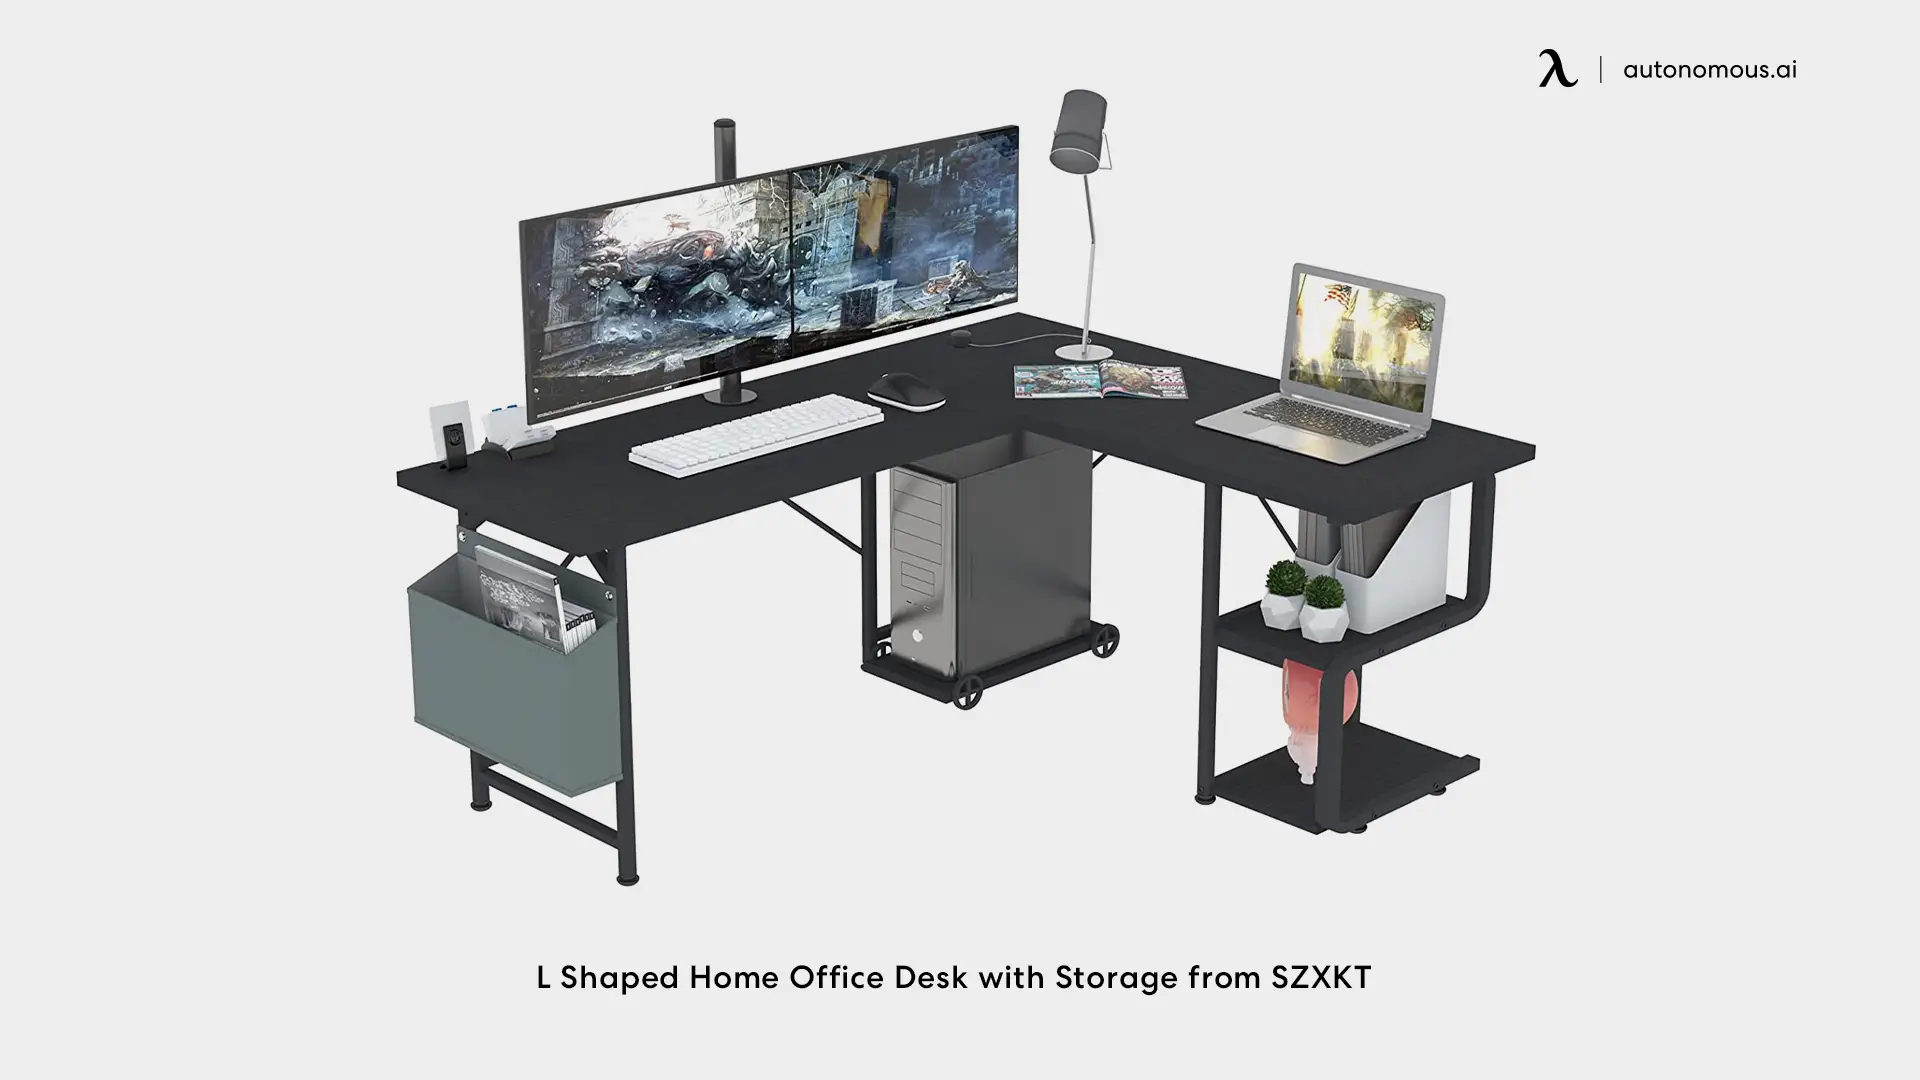 L Shaped Home Office Desk with Storage from SZXKT